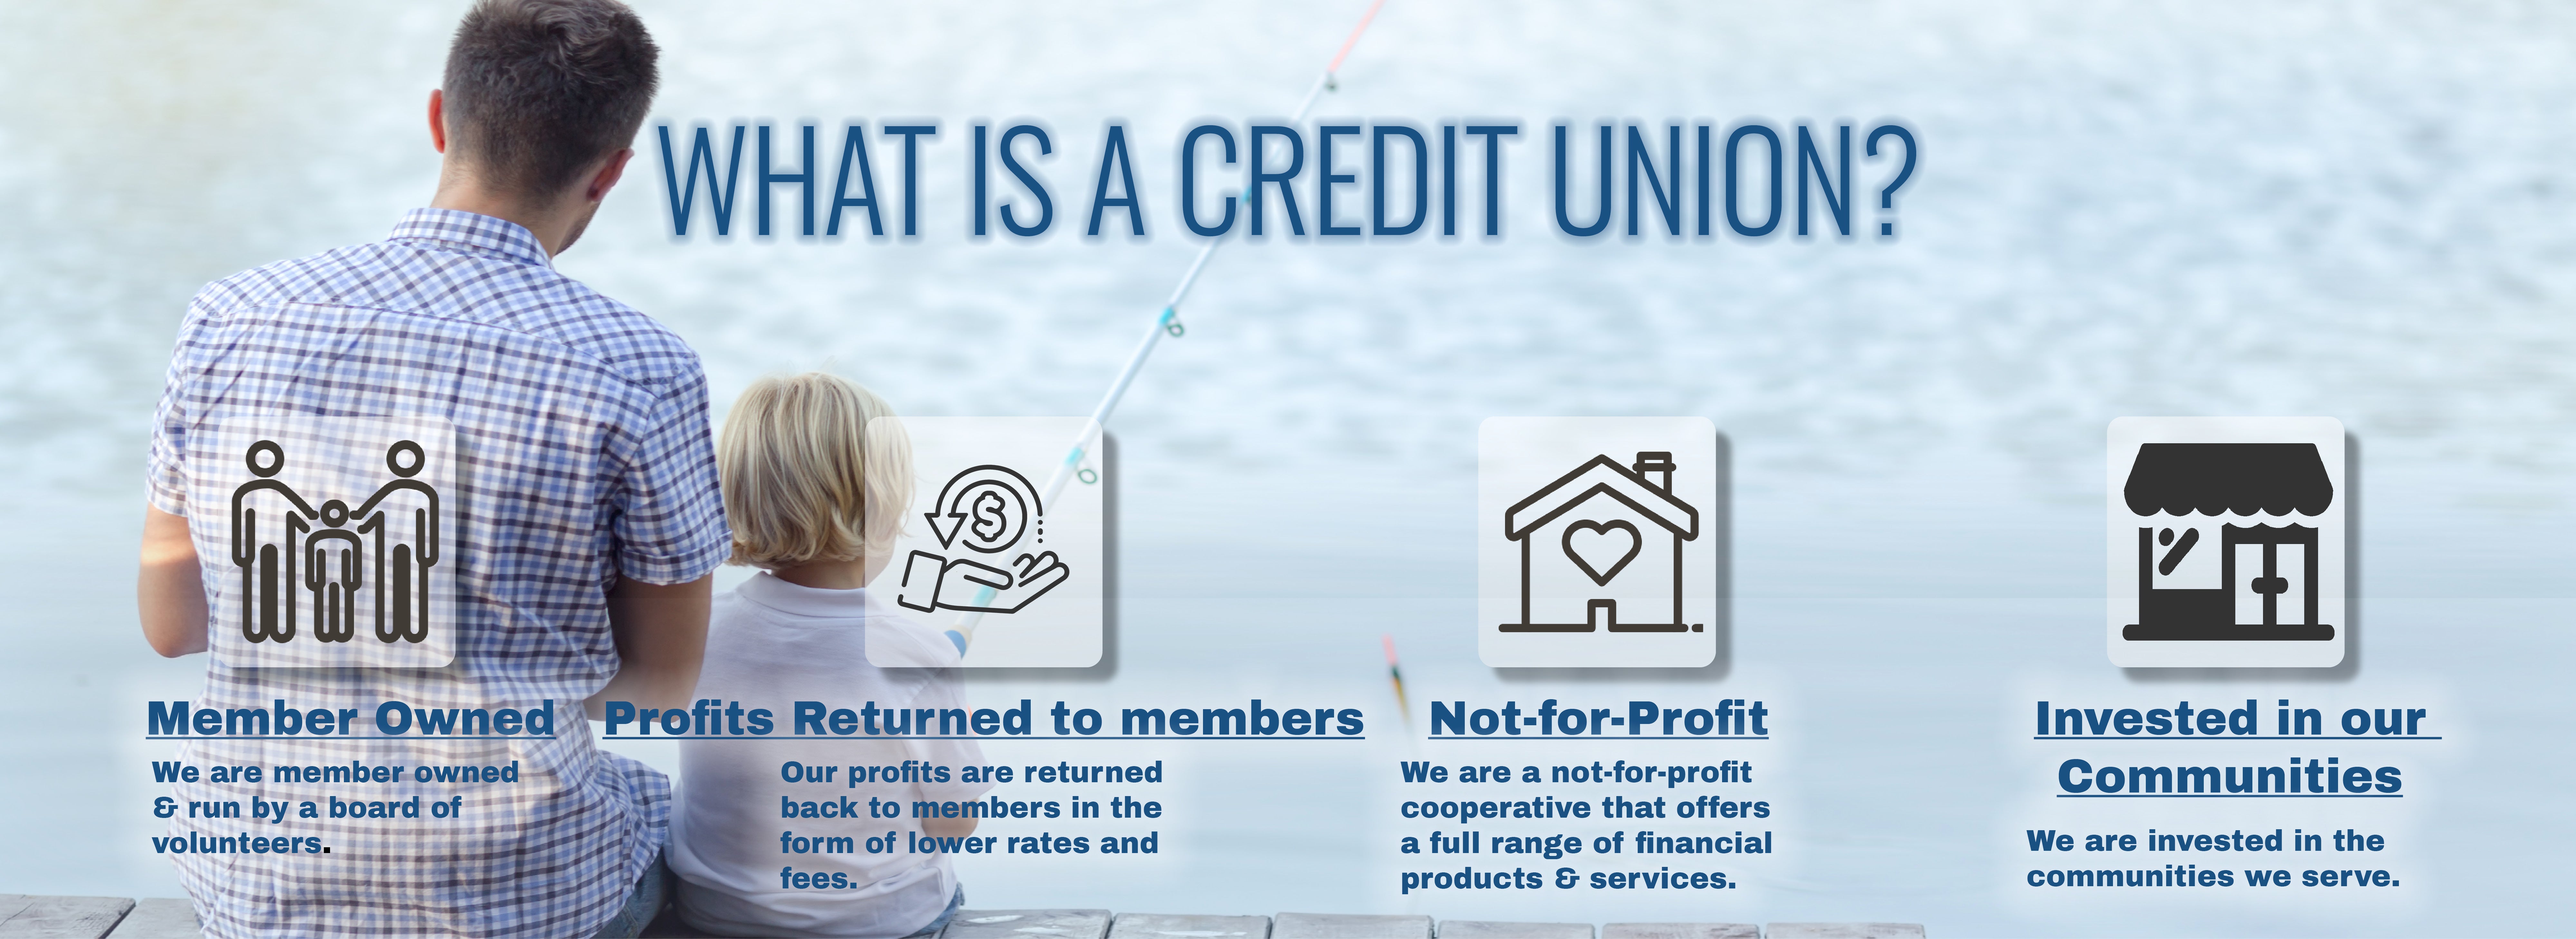 whats a credit union image